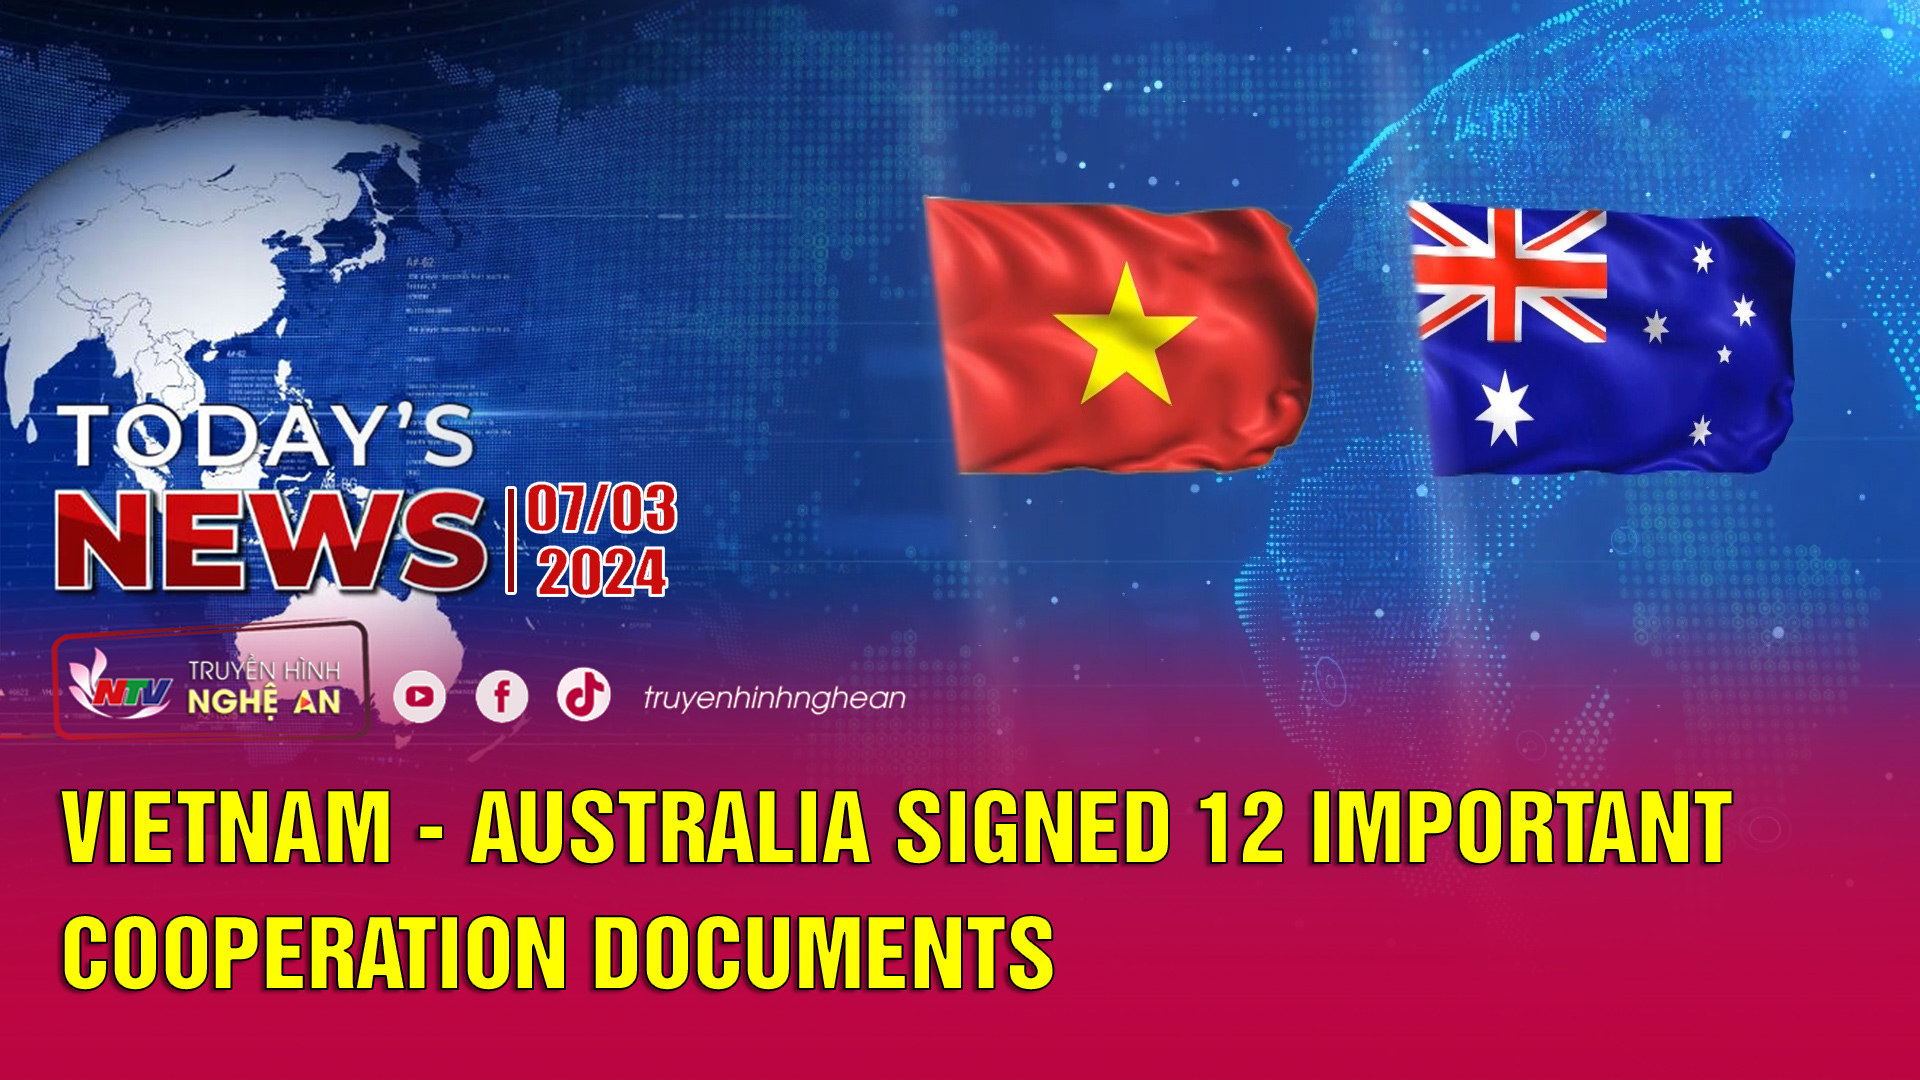 Today's News 07/3/2024: Vietnam - Australia signed 12 important cooperation documents